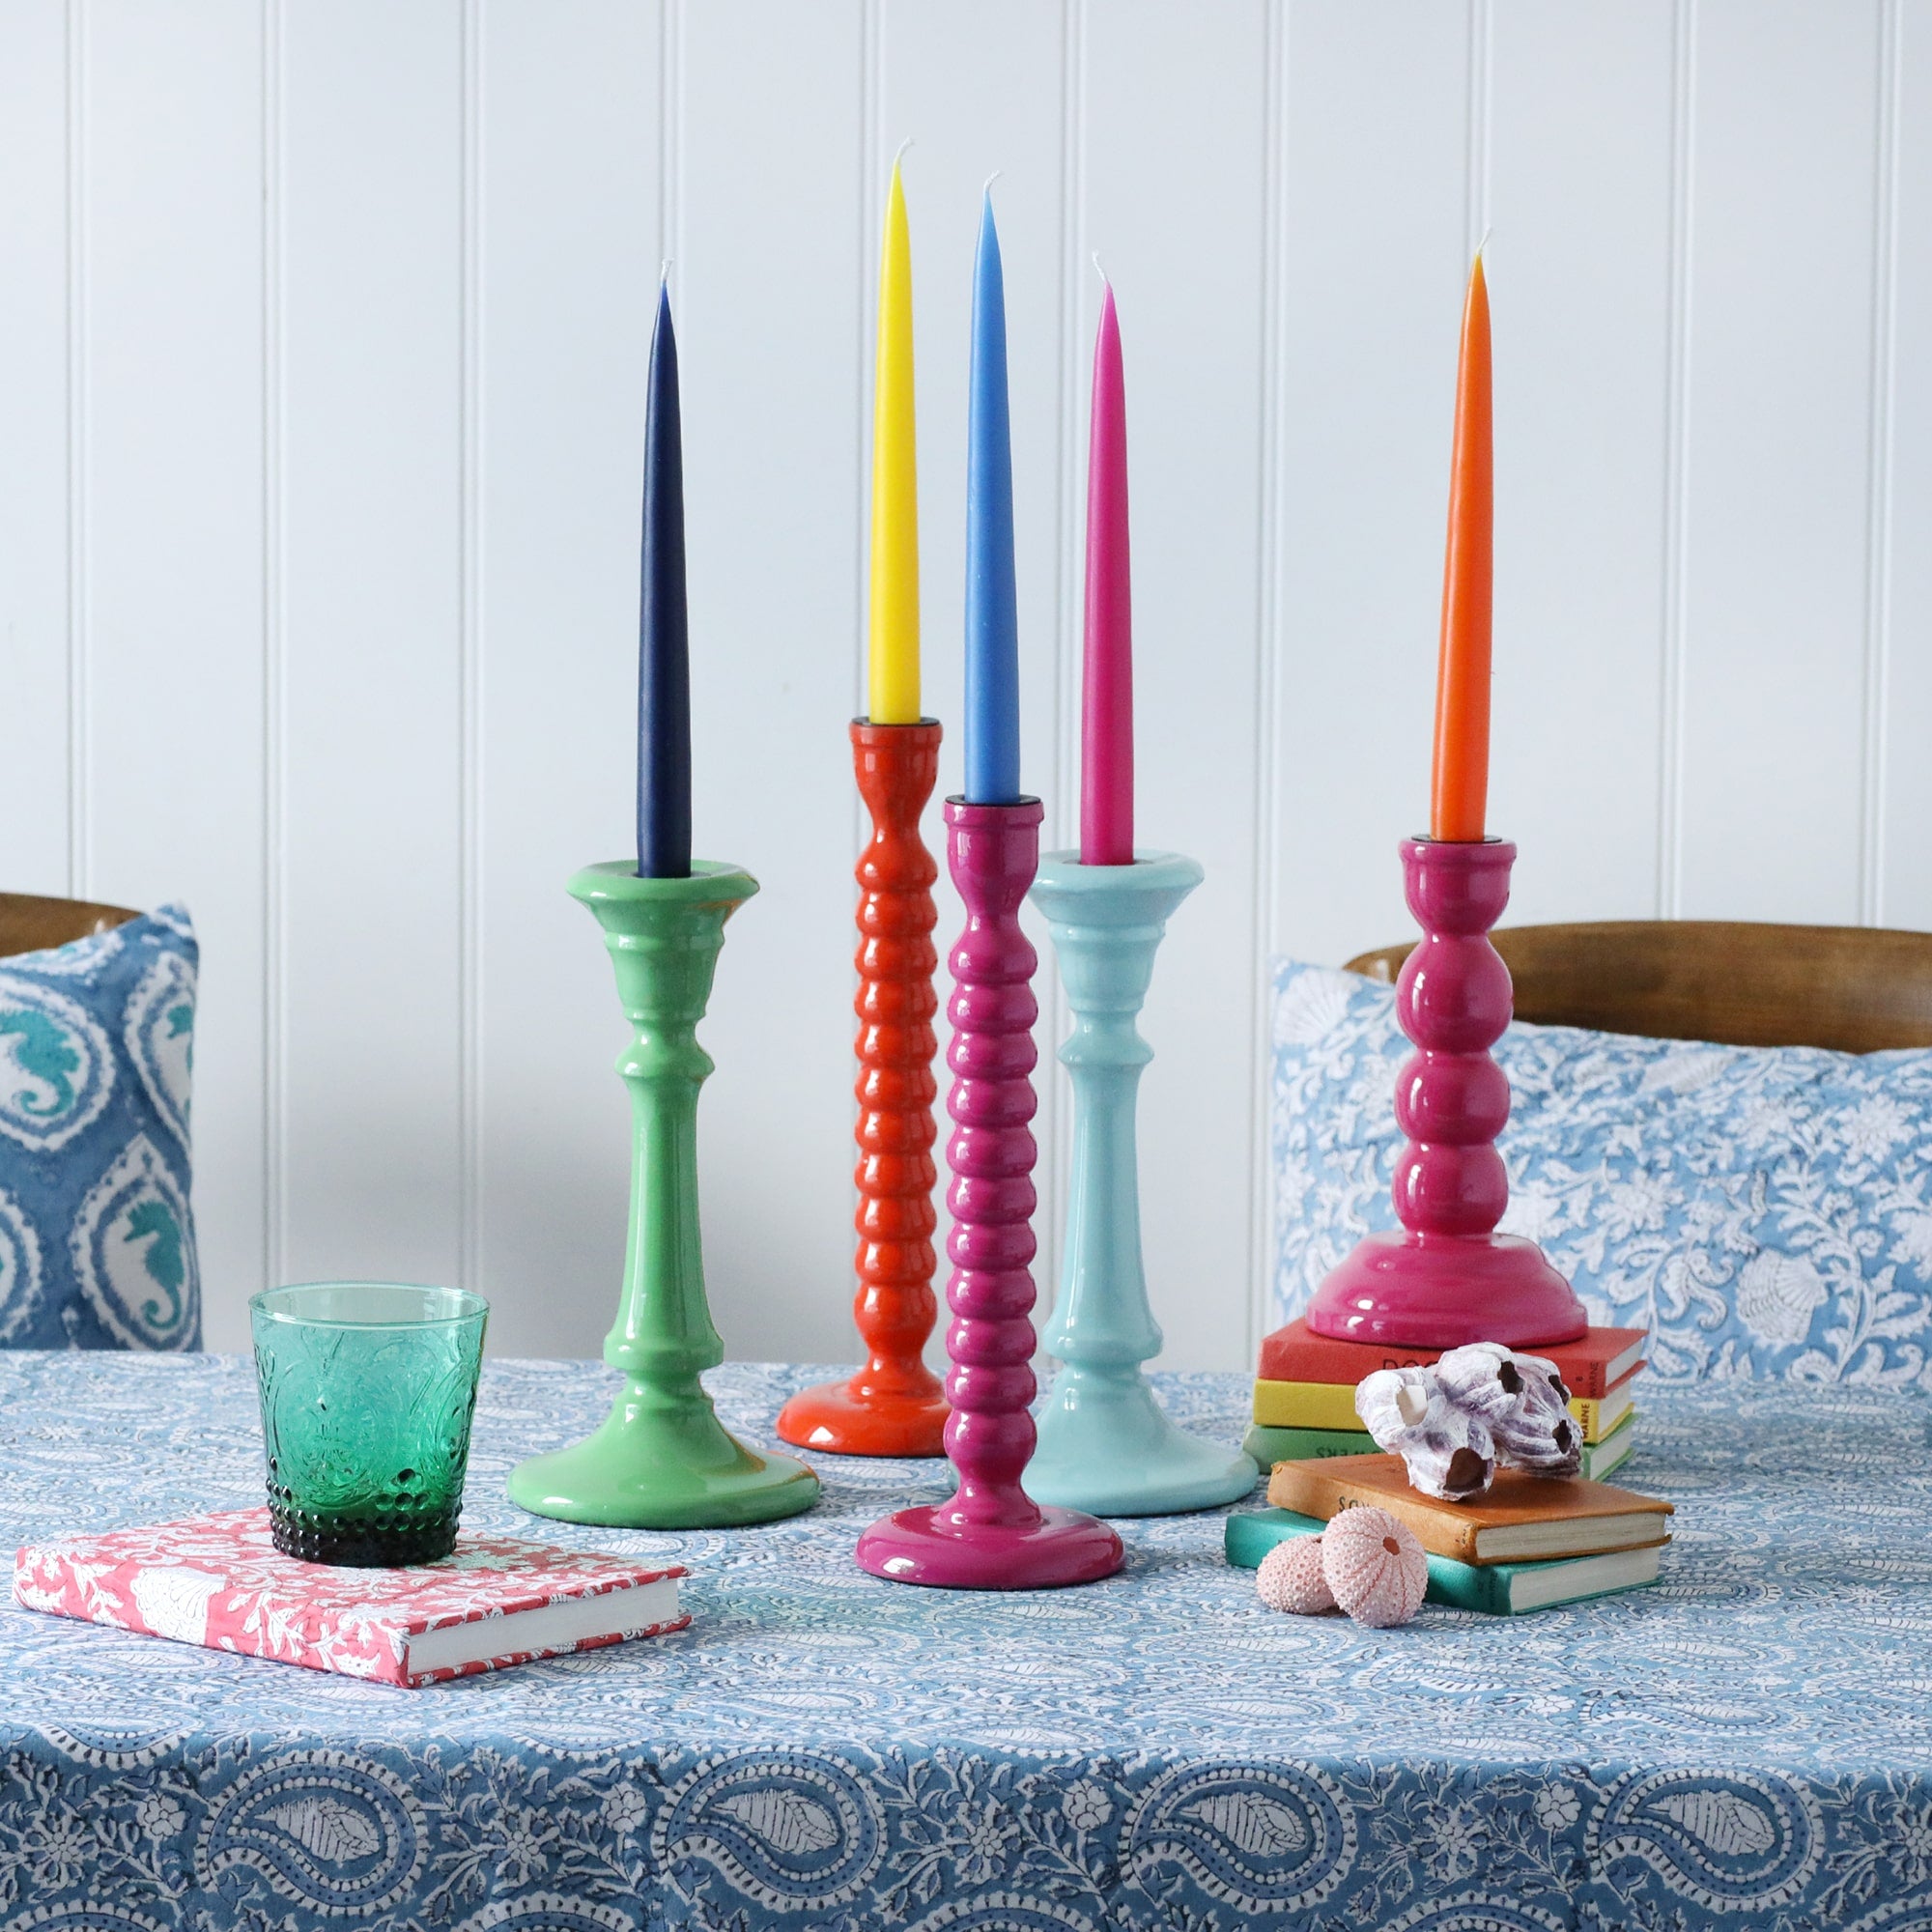 Various candle holders placed on our Samudra collection linen.All of the candle holders have contrasting candles.Also on the table are notebooks and shells,in the background are some of our matching Samudra cushions